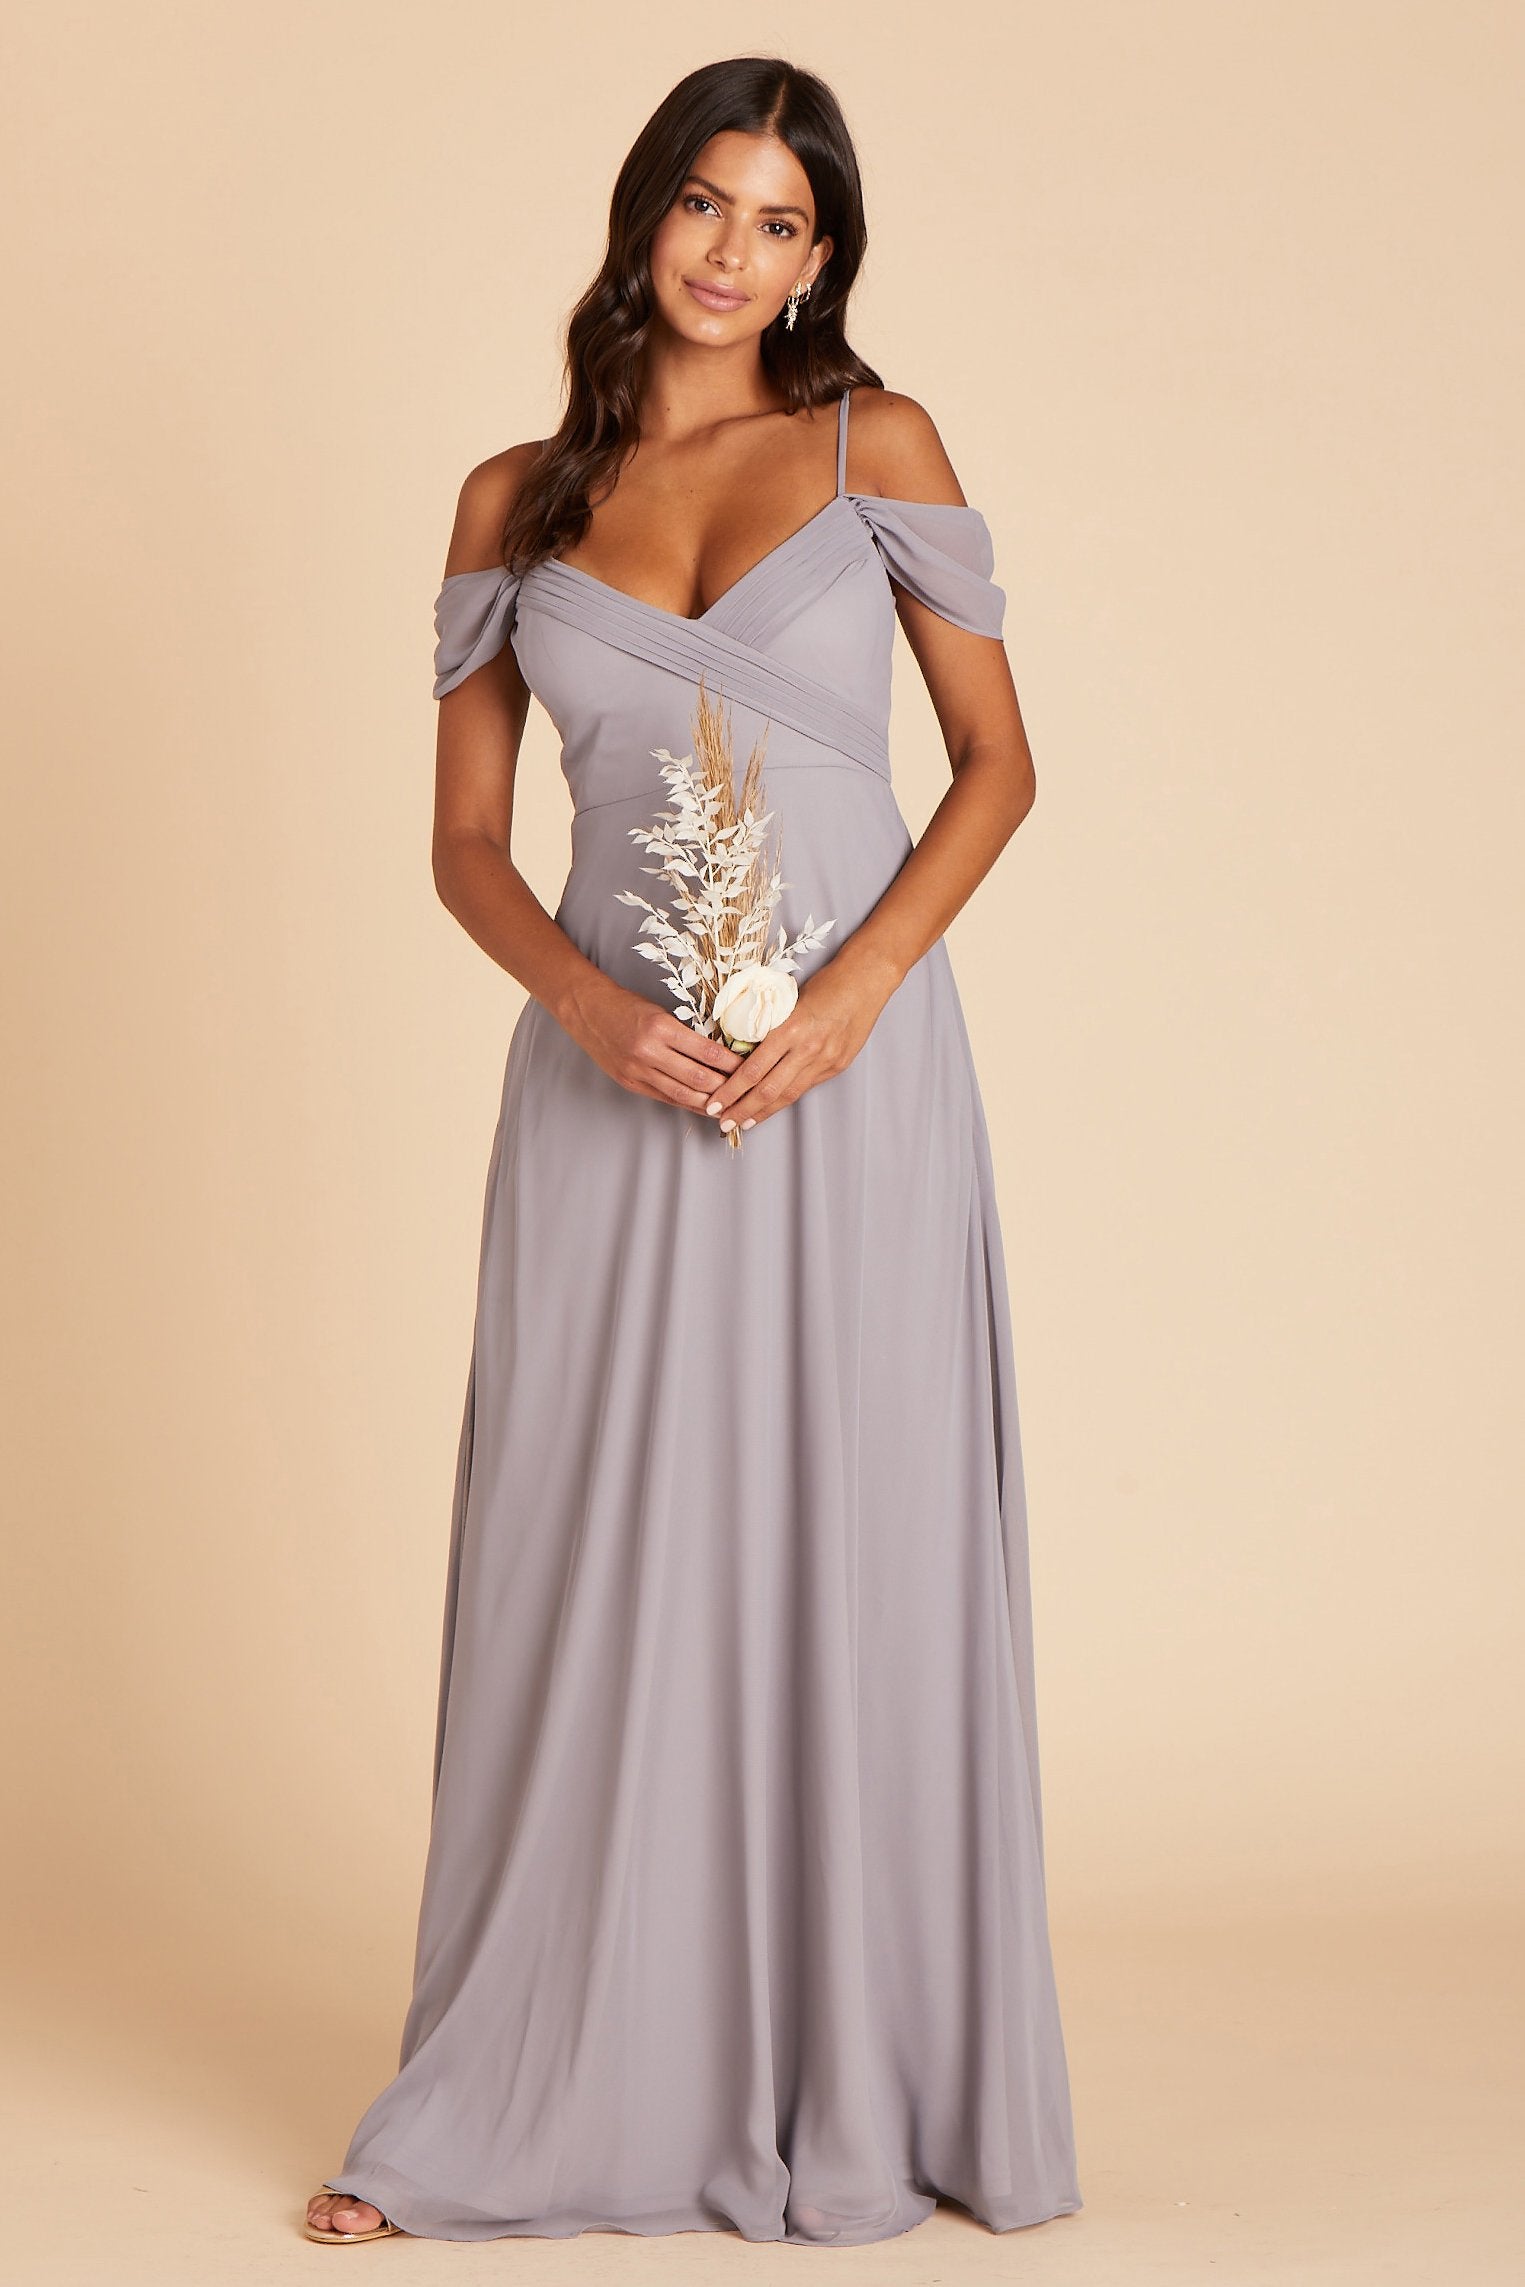 Spence convertible bridesmaids dress in silver chiffon by Birdy Grey, front view